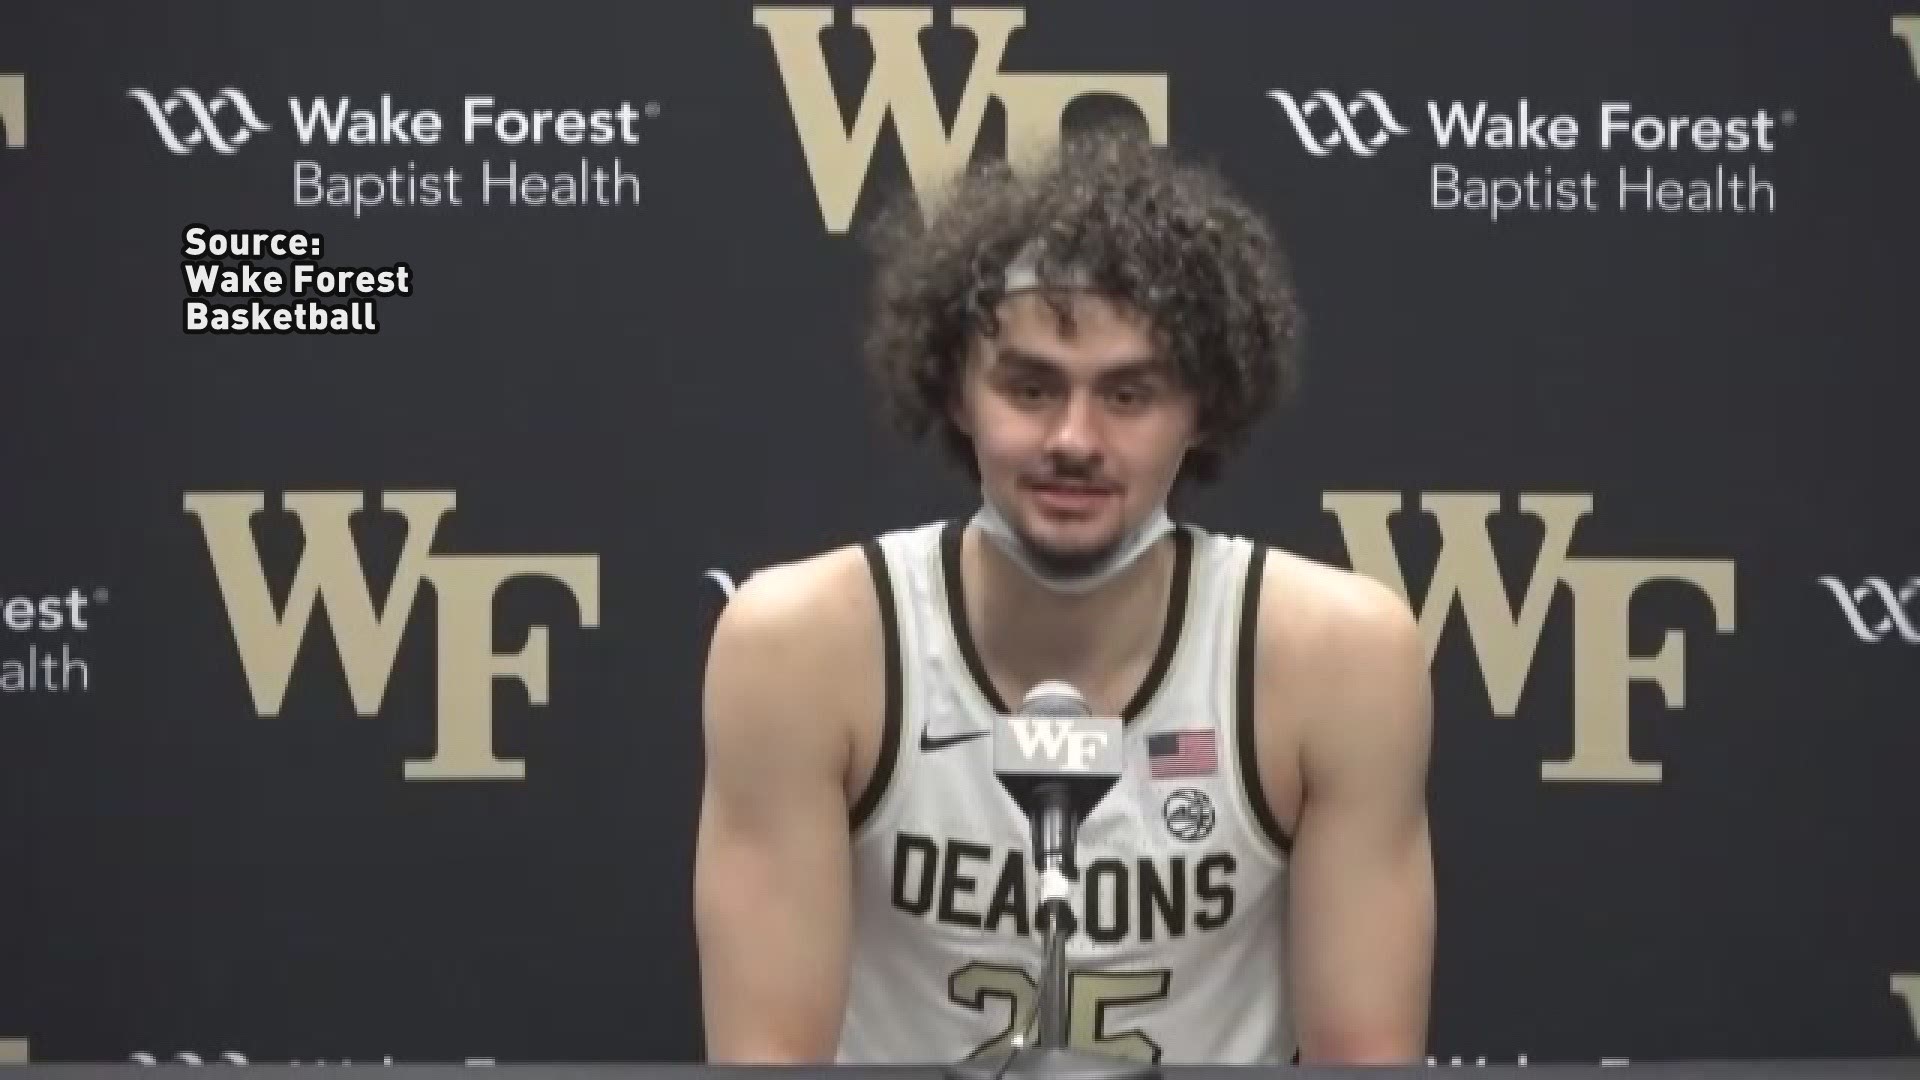 Massoud scored a career-high 31 points in the Demon Deacons win